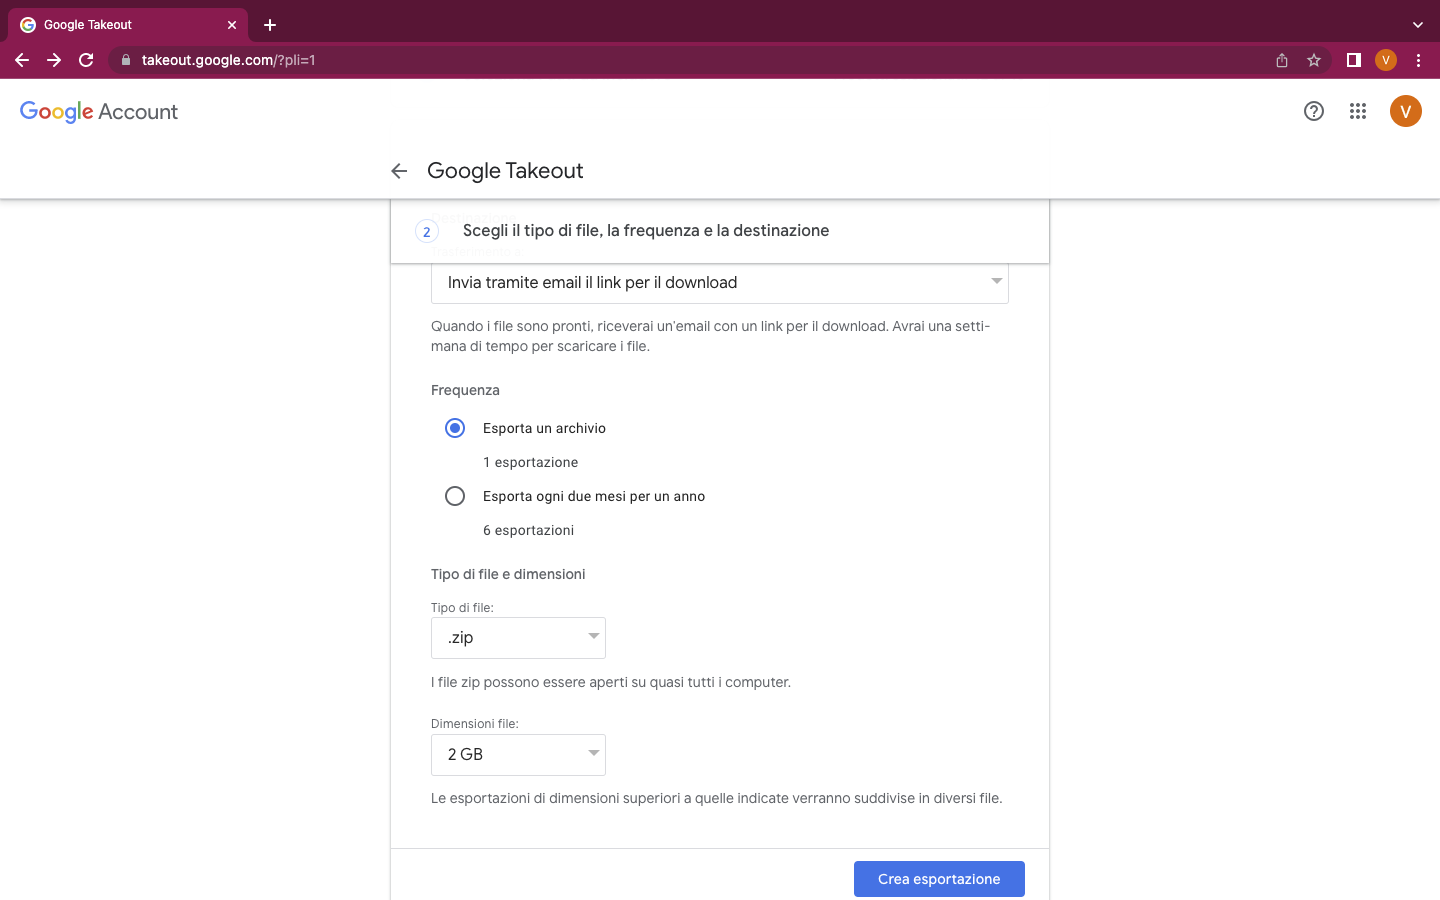 Google Account Takeout